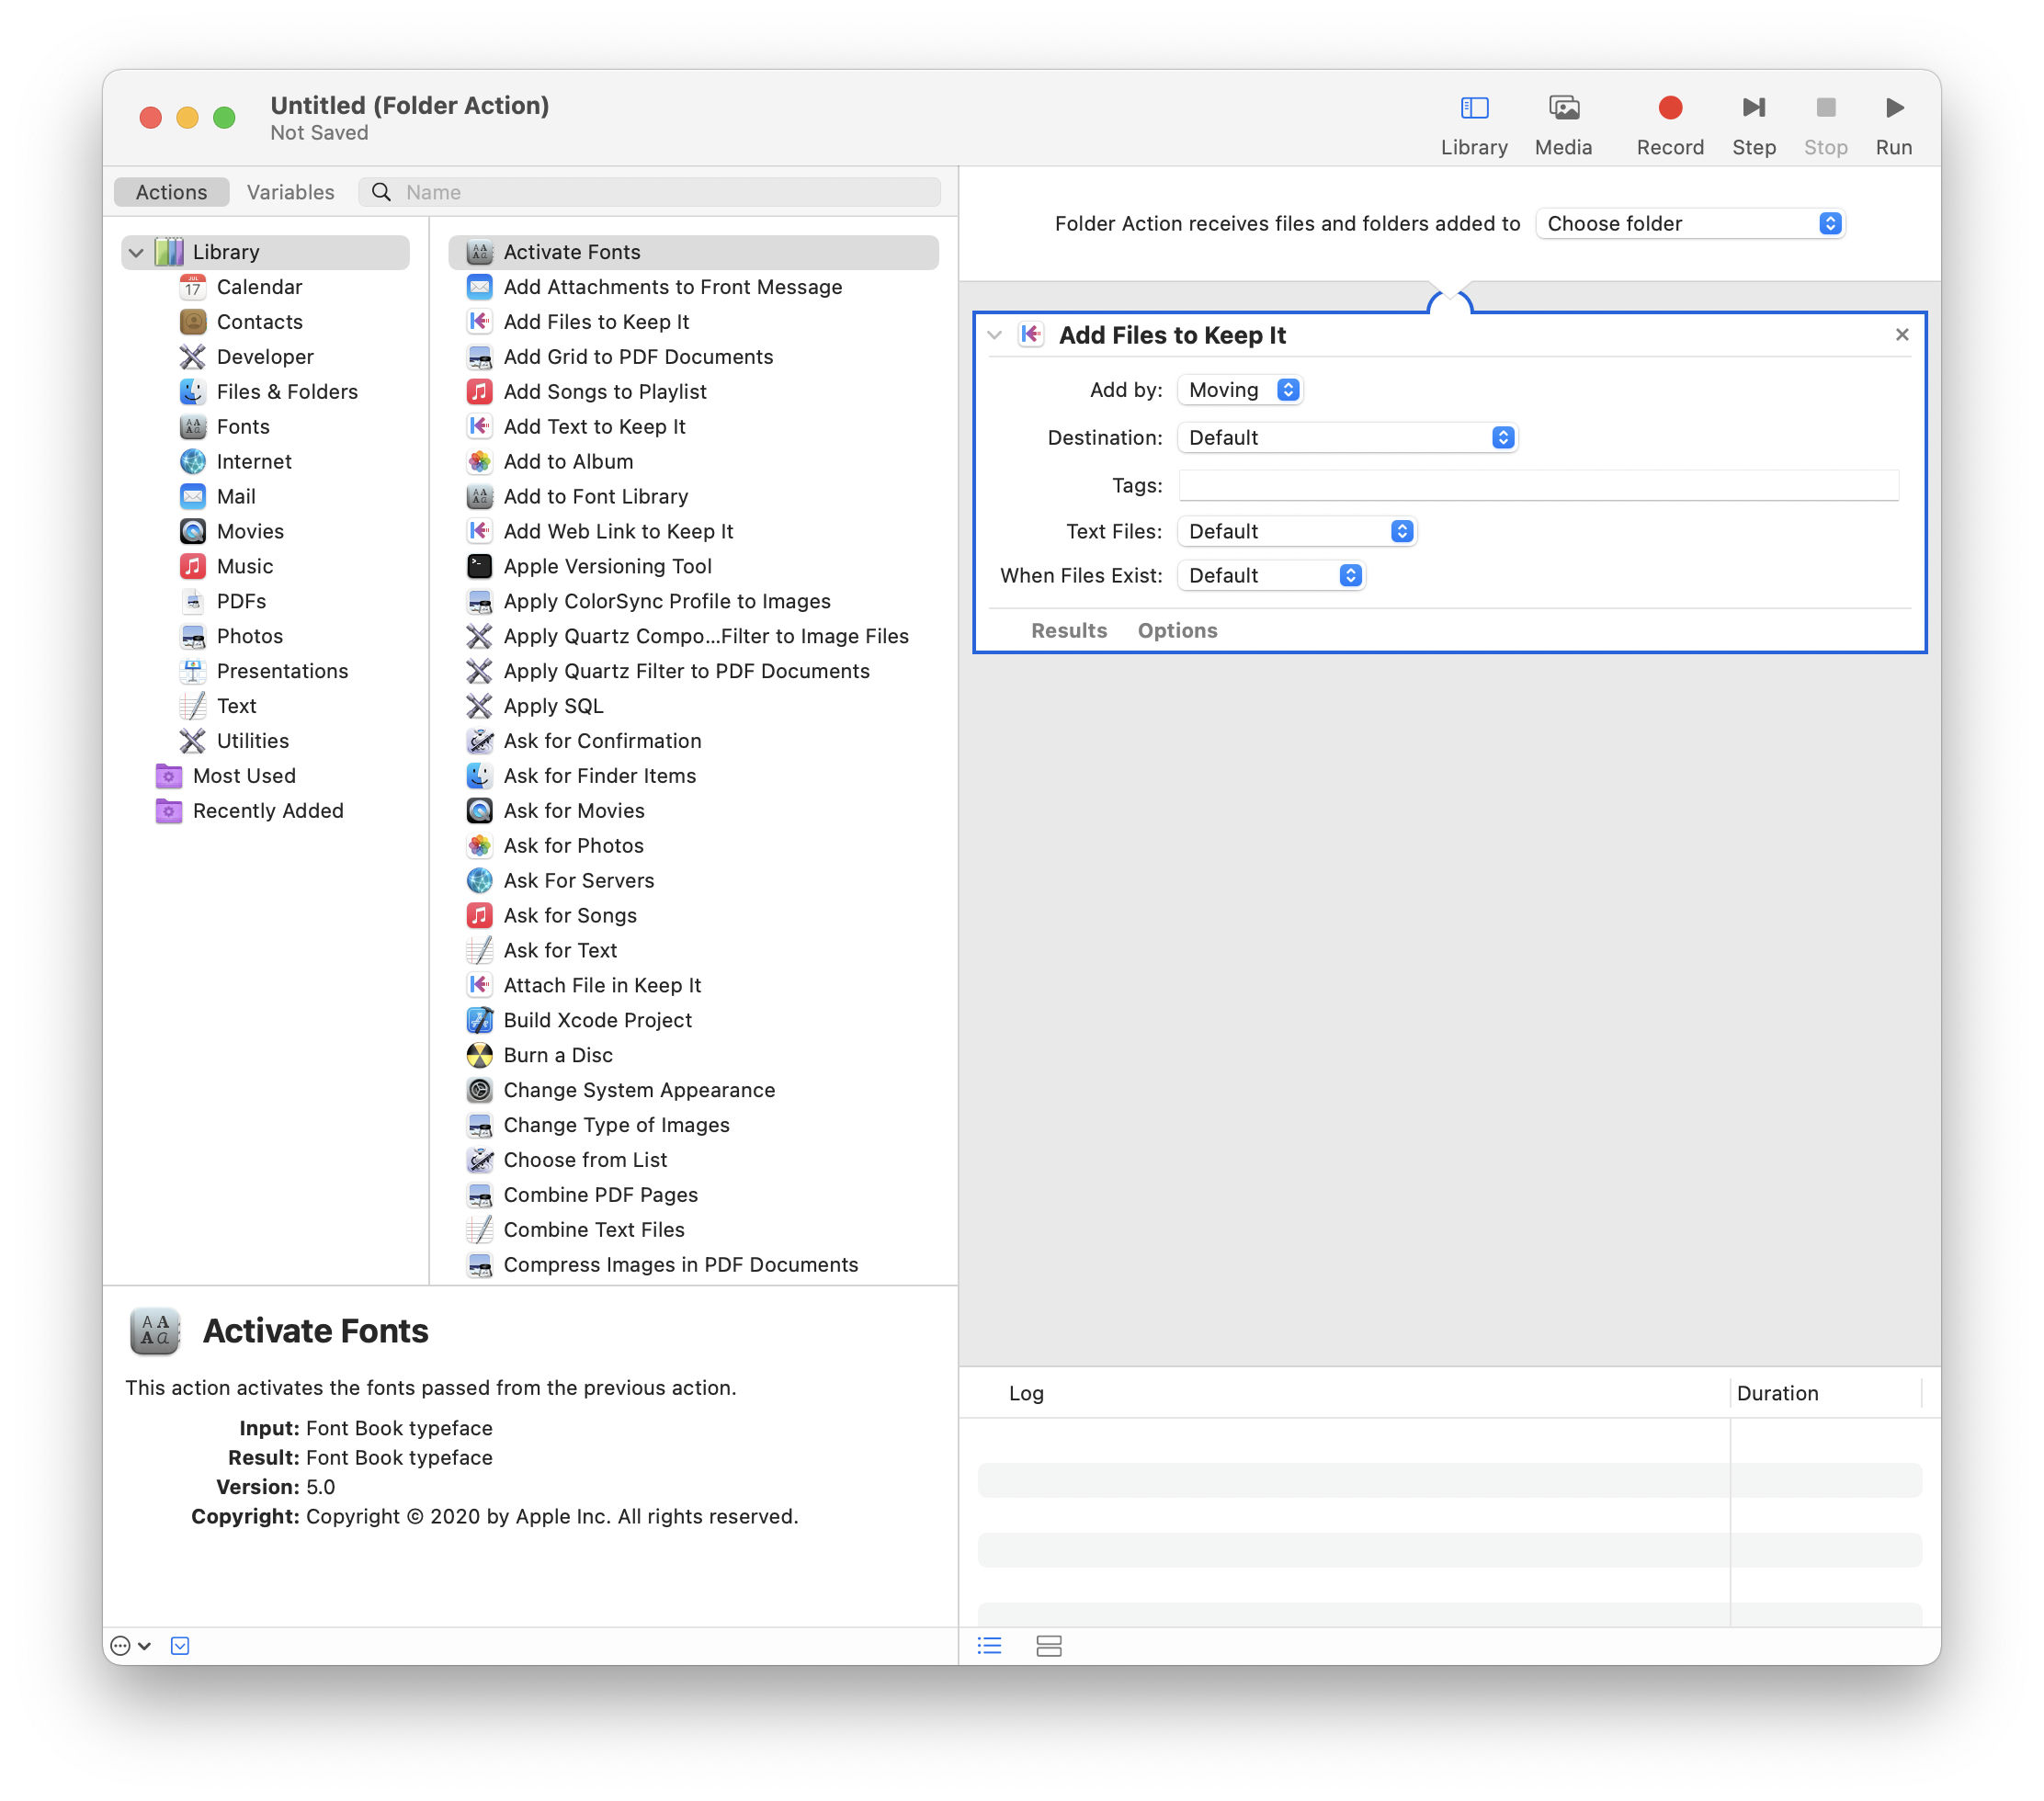 Screenshot of the final workflow in Automator